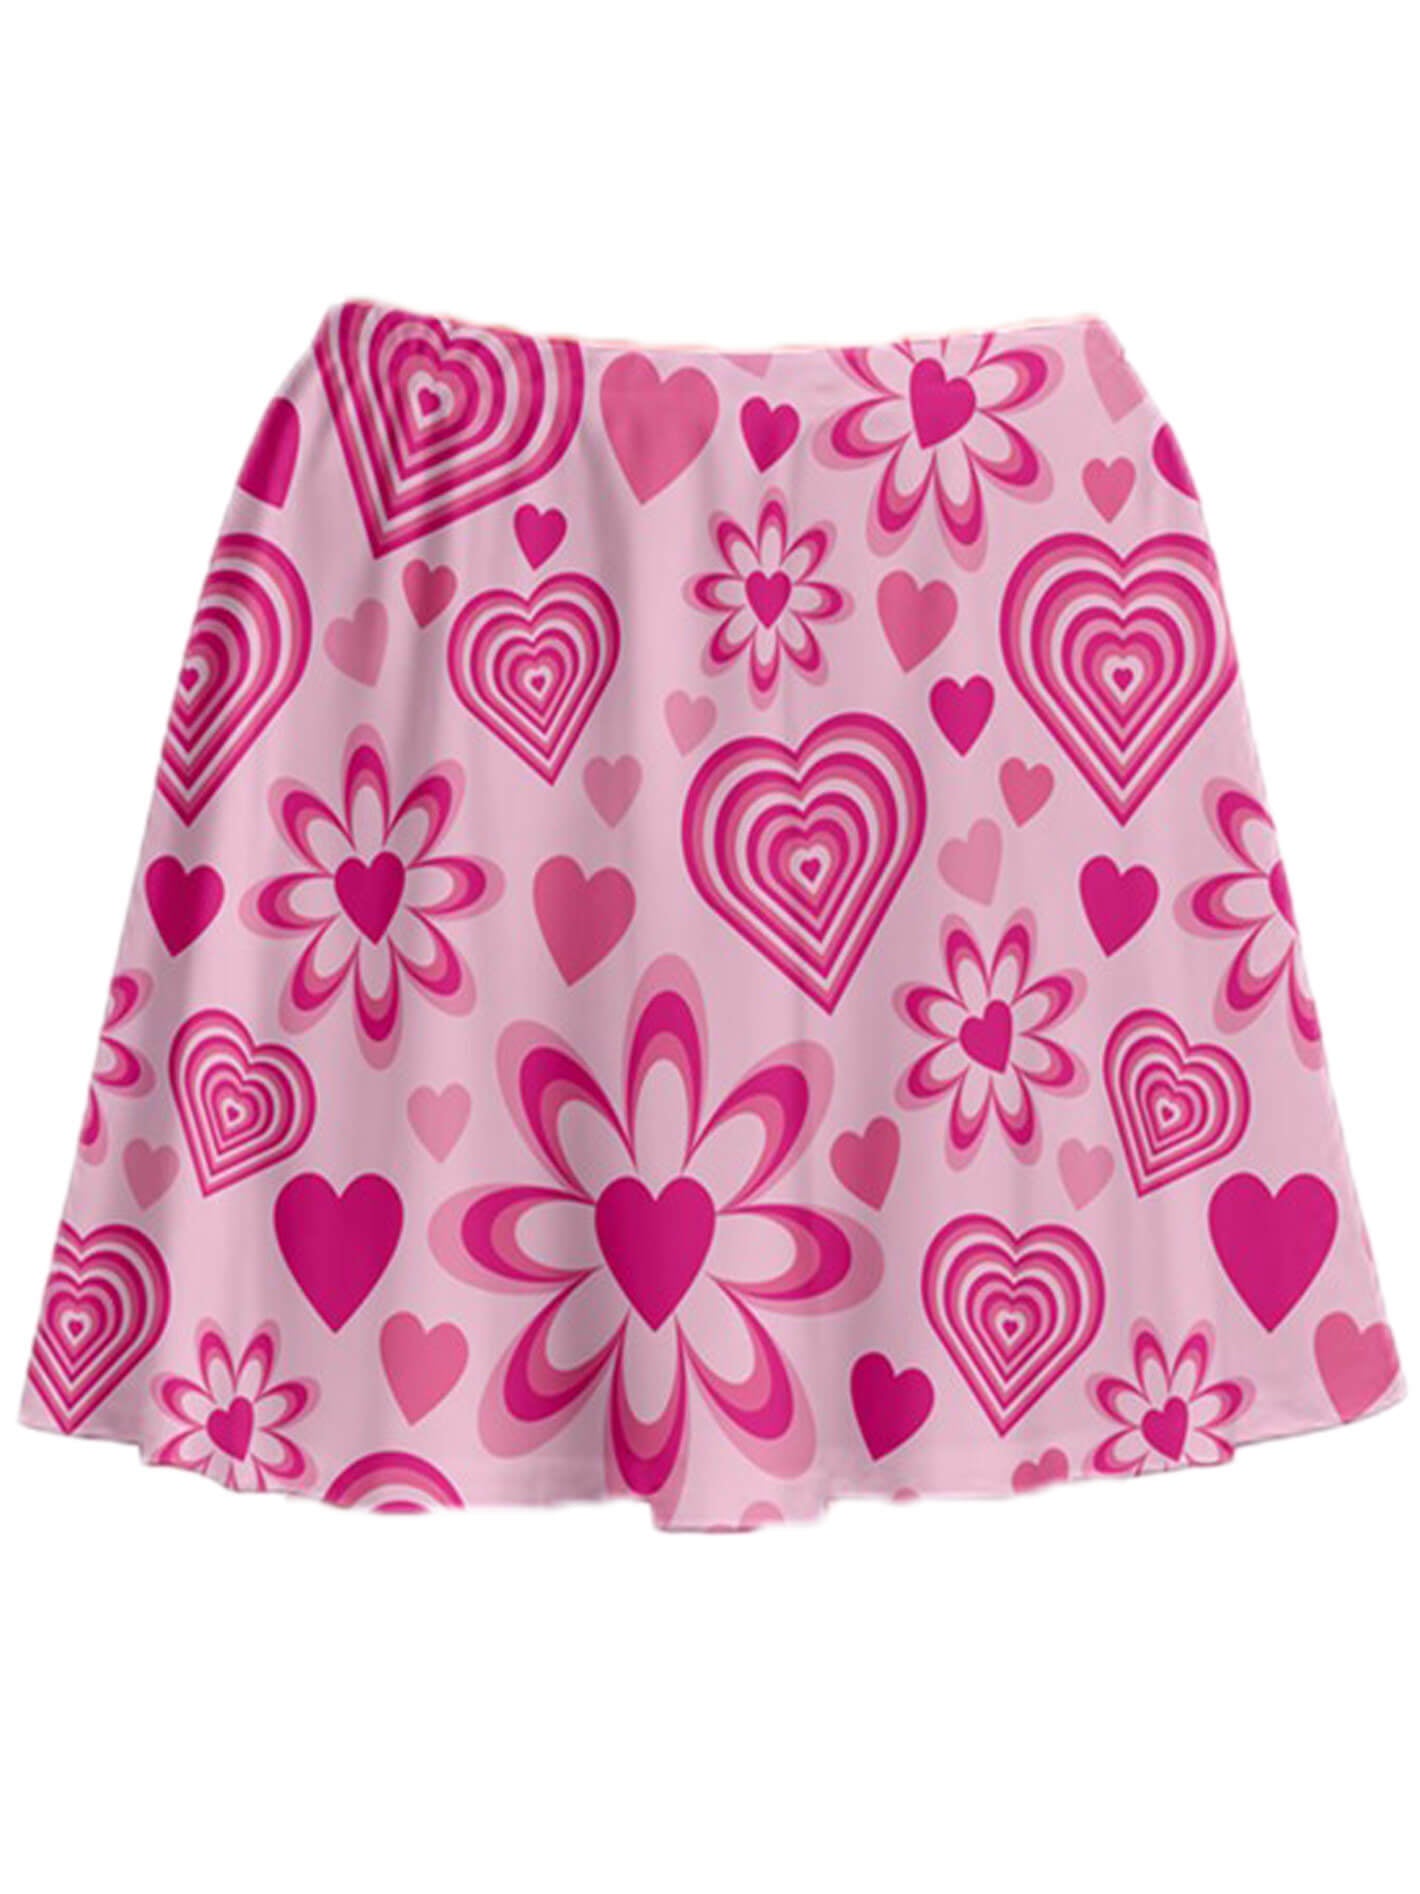 Y2K pink aesthetic plus size skirt.